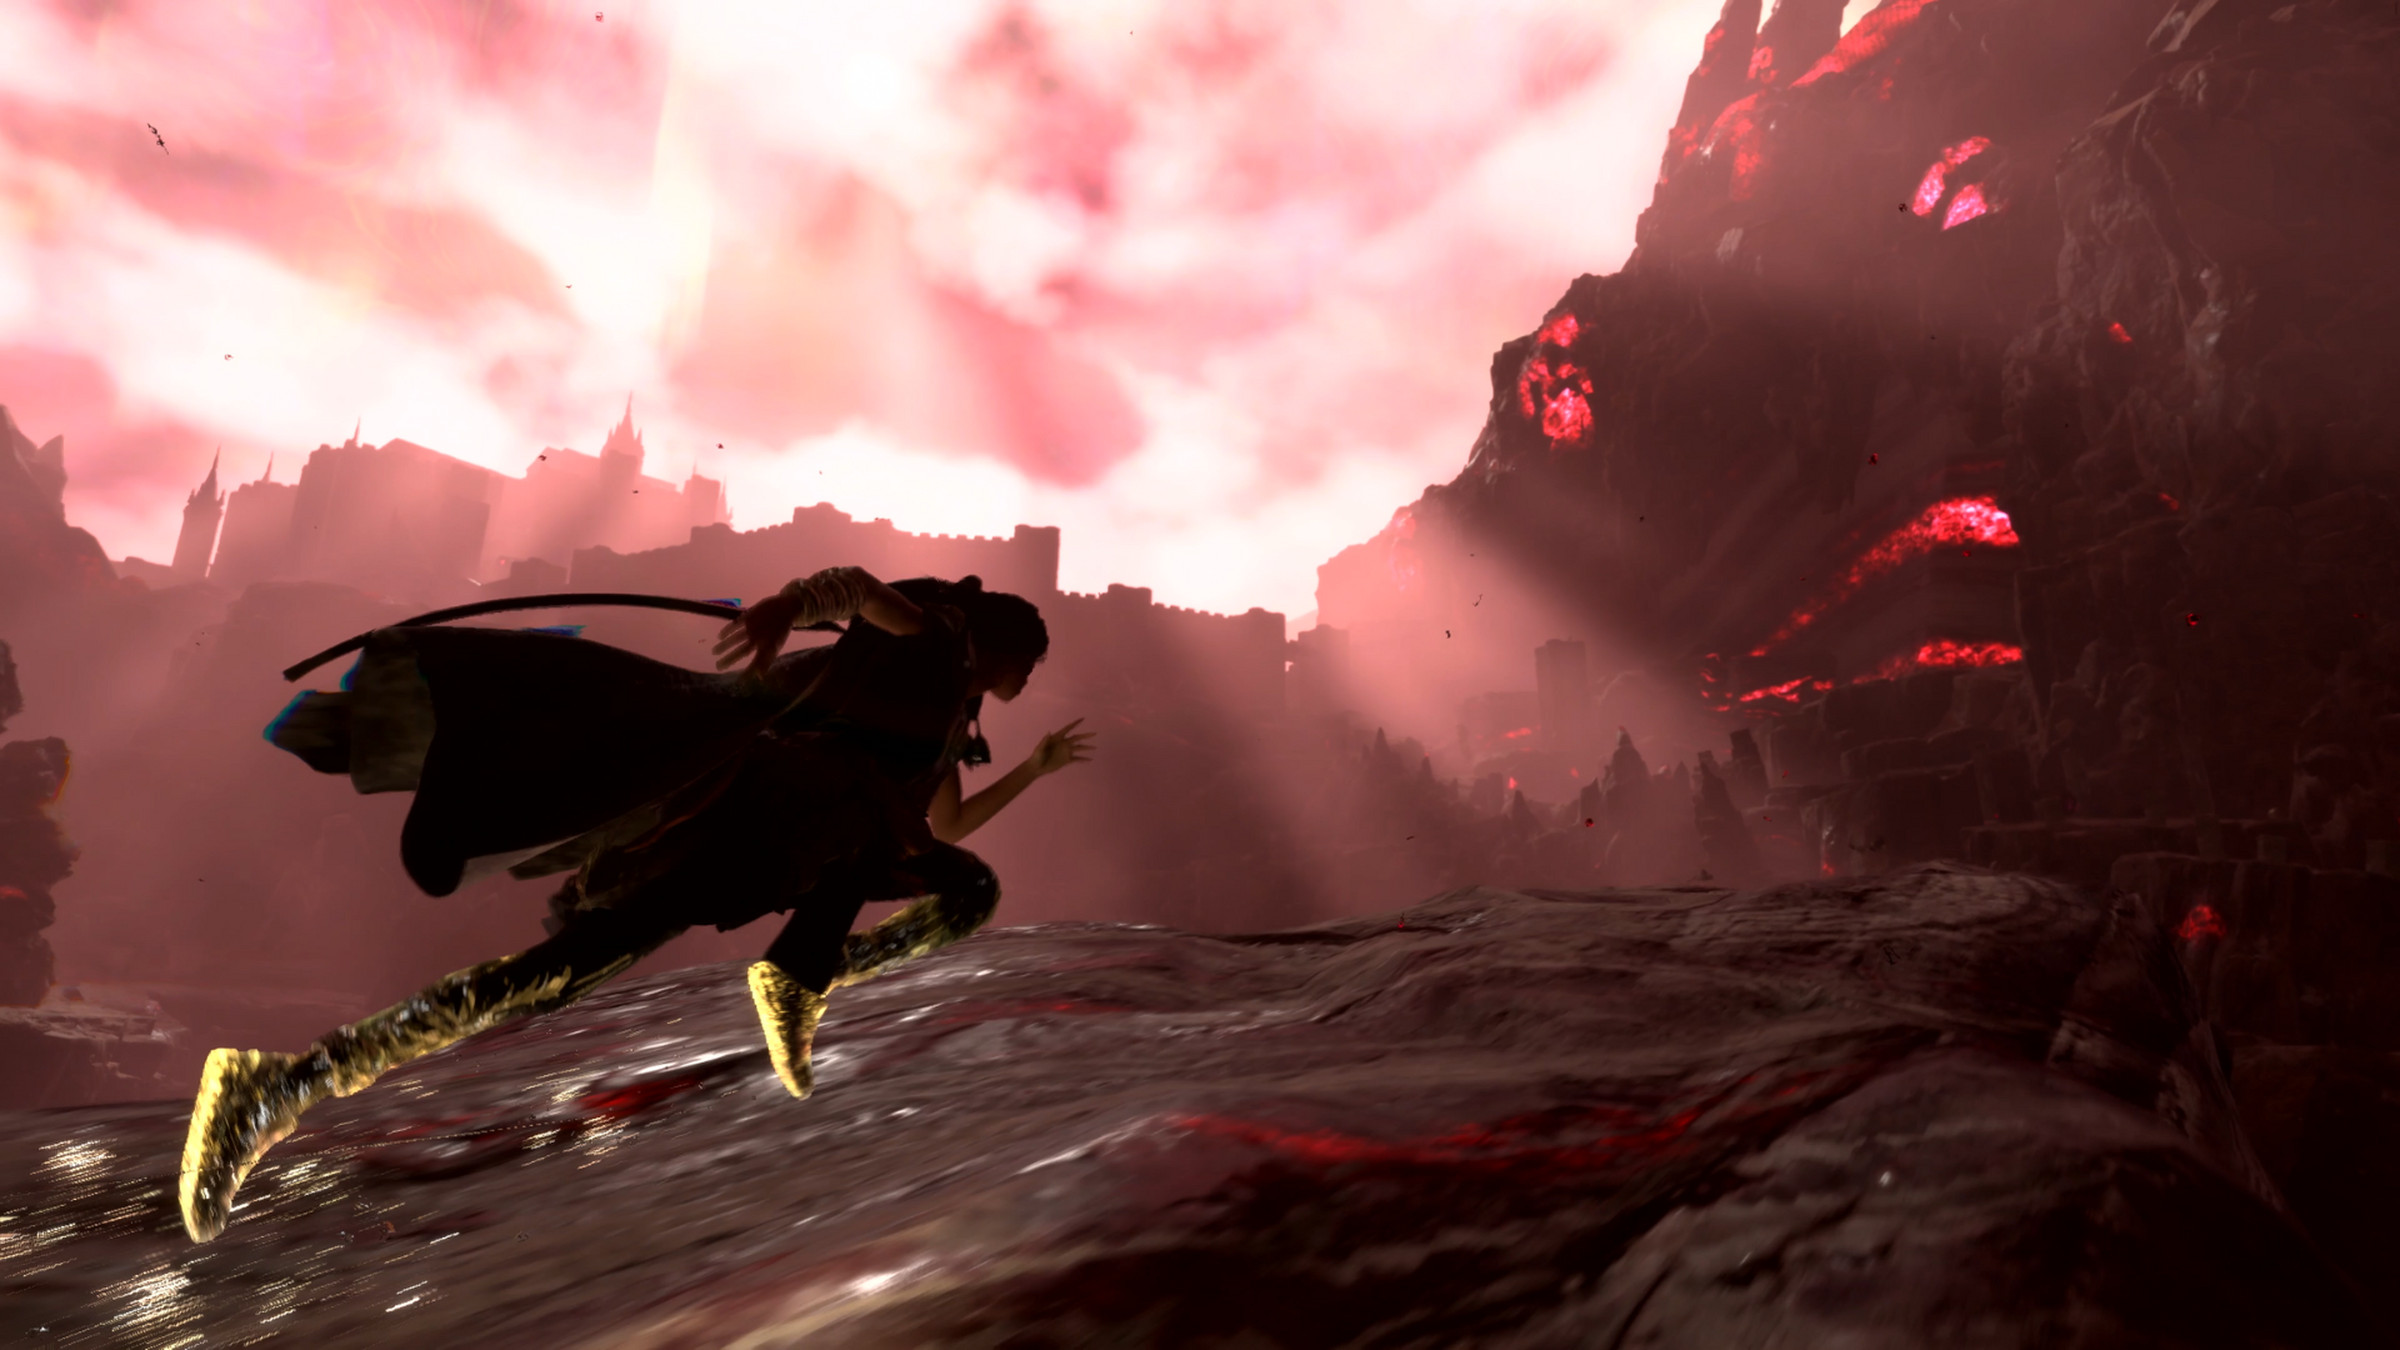 Screenshot from Forspoken featuring Frey parkouring up the side of a mountain against a violent red sky